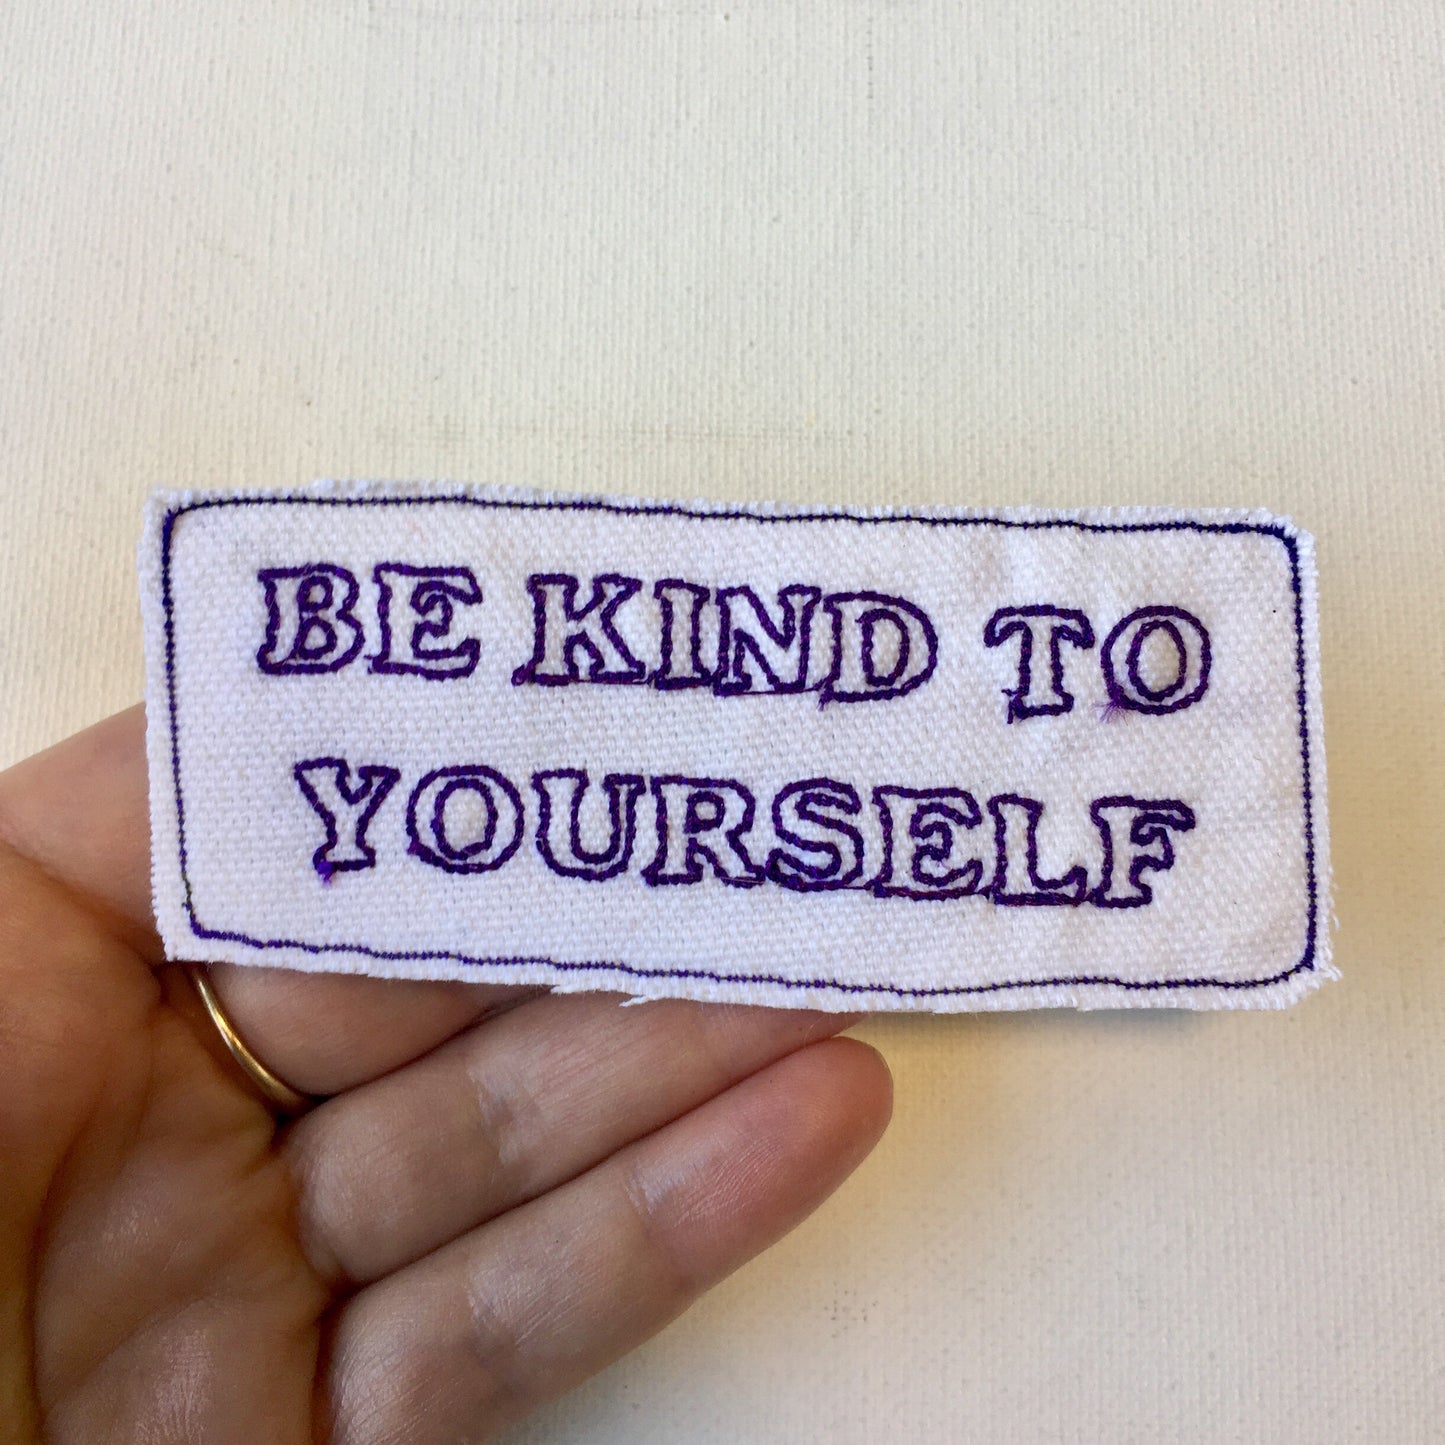 Be Kind 2 You! Handmade Embroidered Canvas Patch.